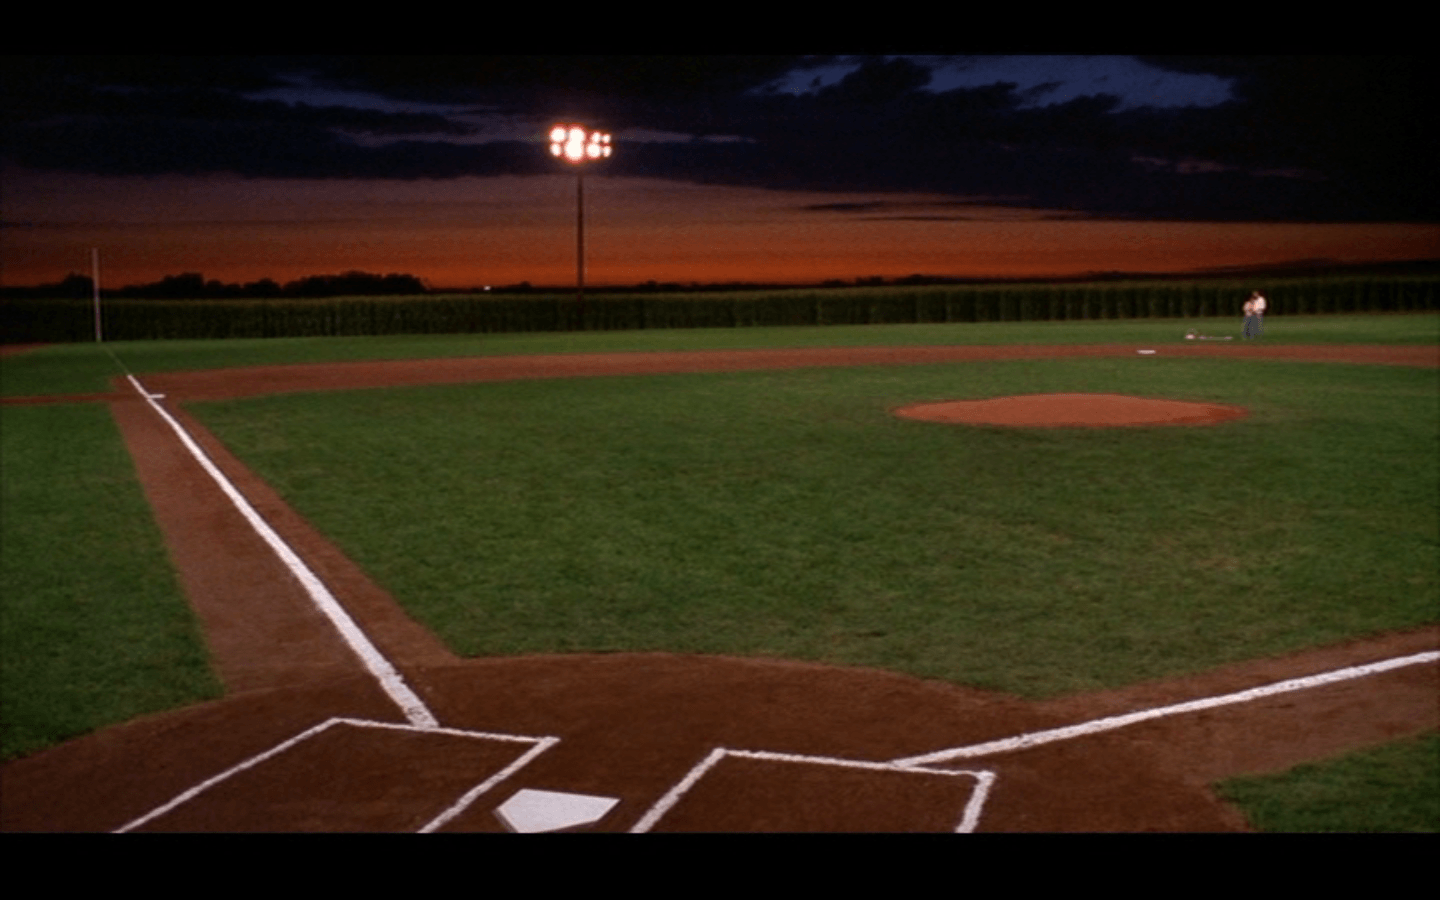 Startup mistakes I've made, The field of dreams